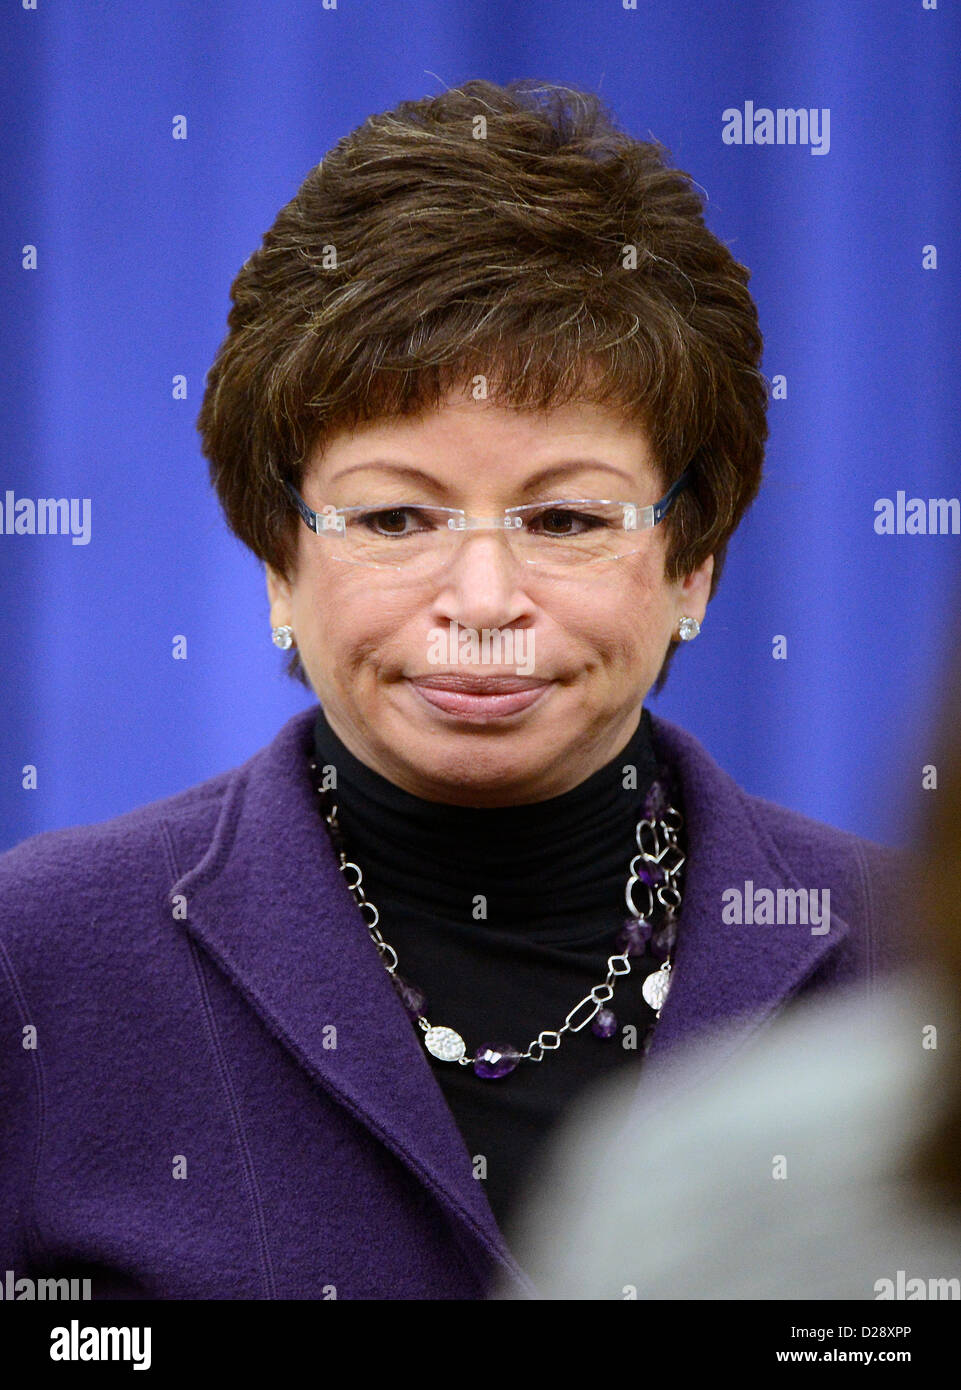 Senior Advisor Valerie Jarrett attends the remarks of U.S. President Barack Obama and Vice President Joe Biden at an event at the White House in Washington, D.C. to unveil a set of proposals to reduce gun violence on Wednesday, January 16, 2012. .Credit: Ron Sachs / CNP Stock Photo